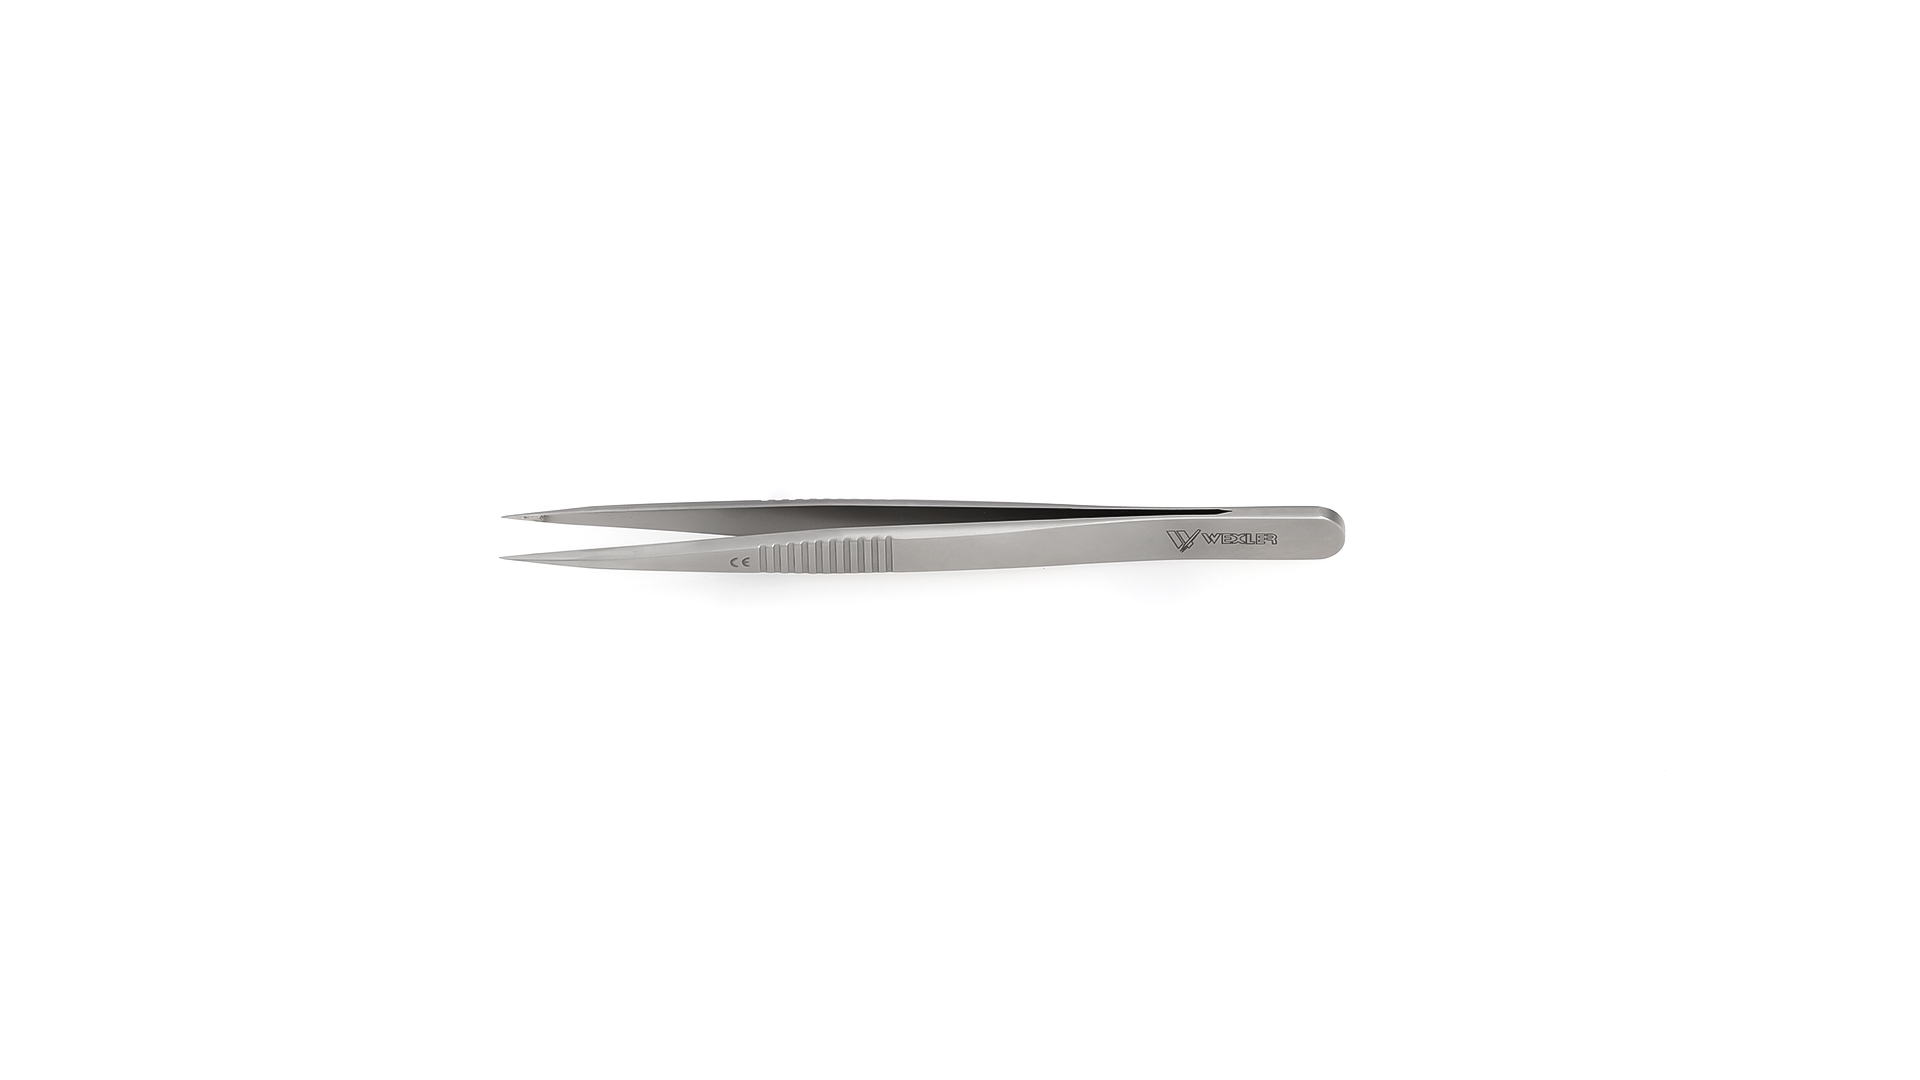 Jeweler Style Forceps #3  - Straight 0.3mm TC coated tips